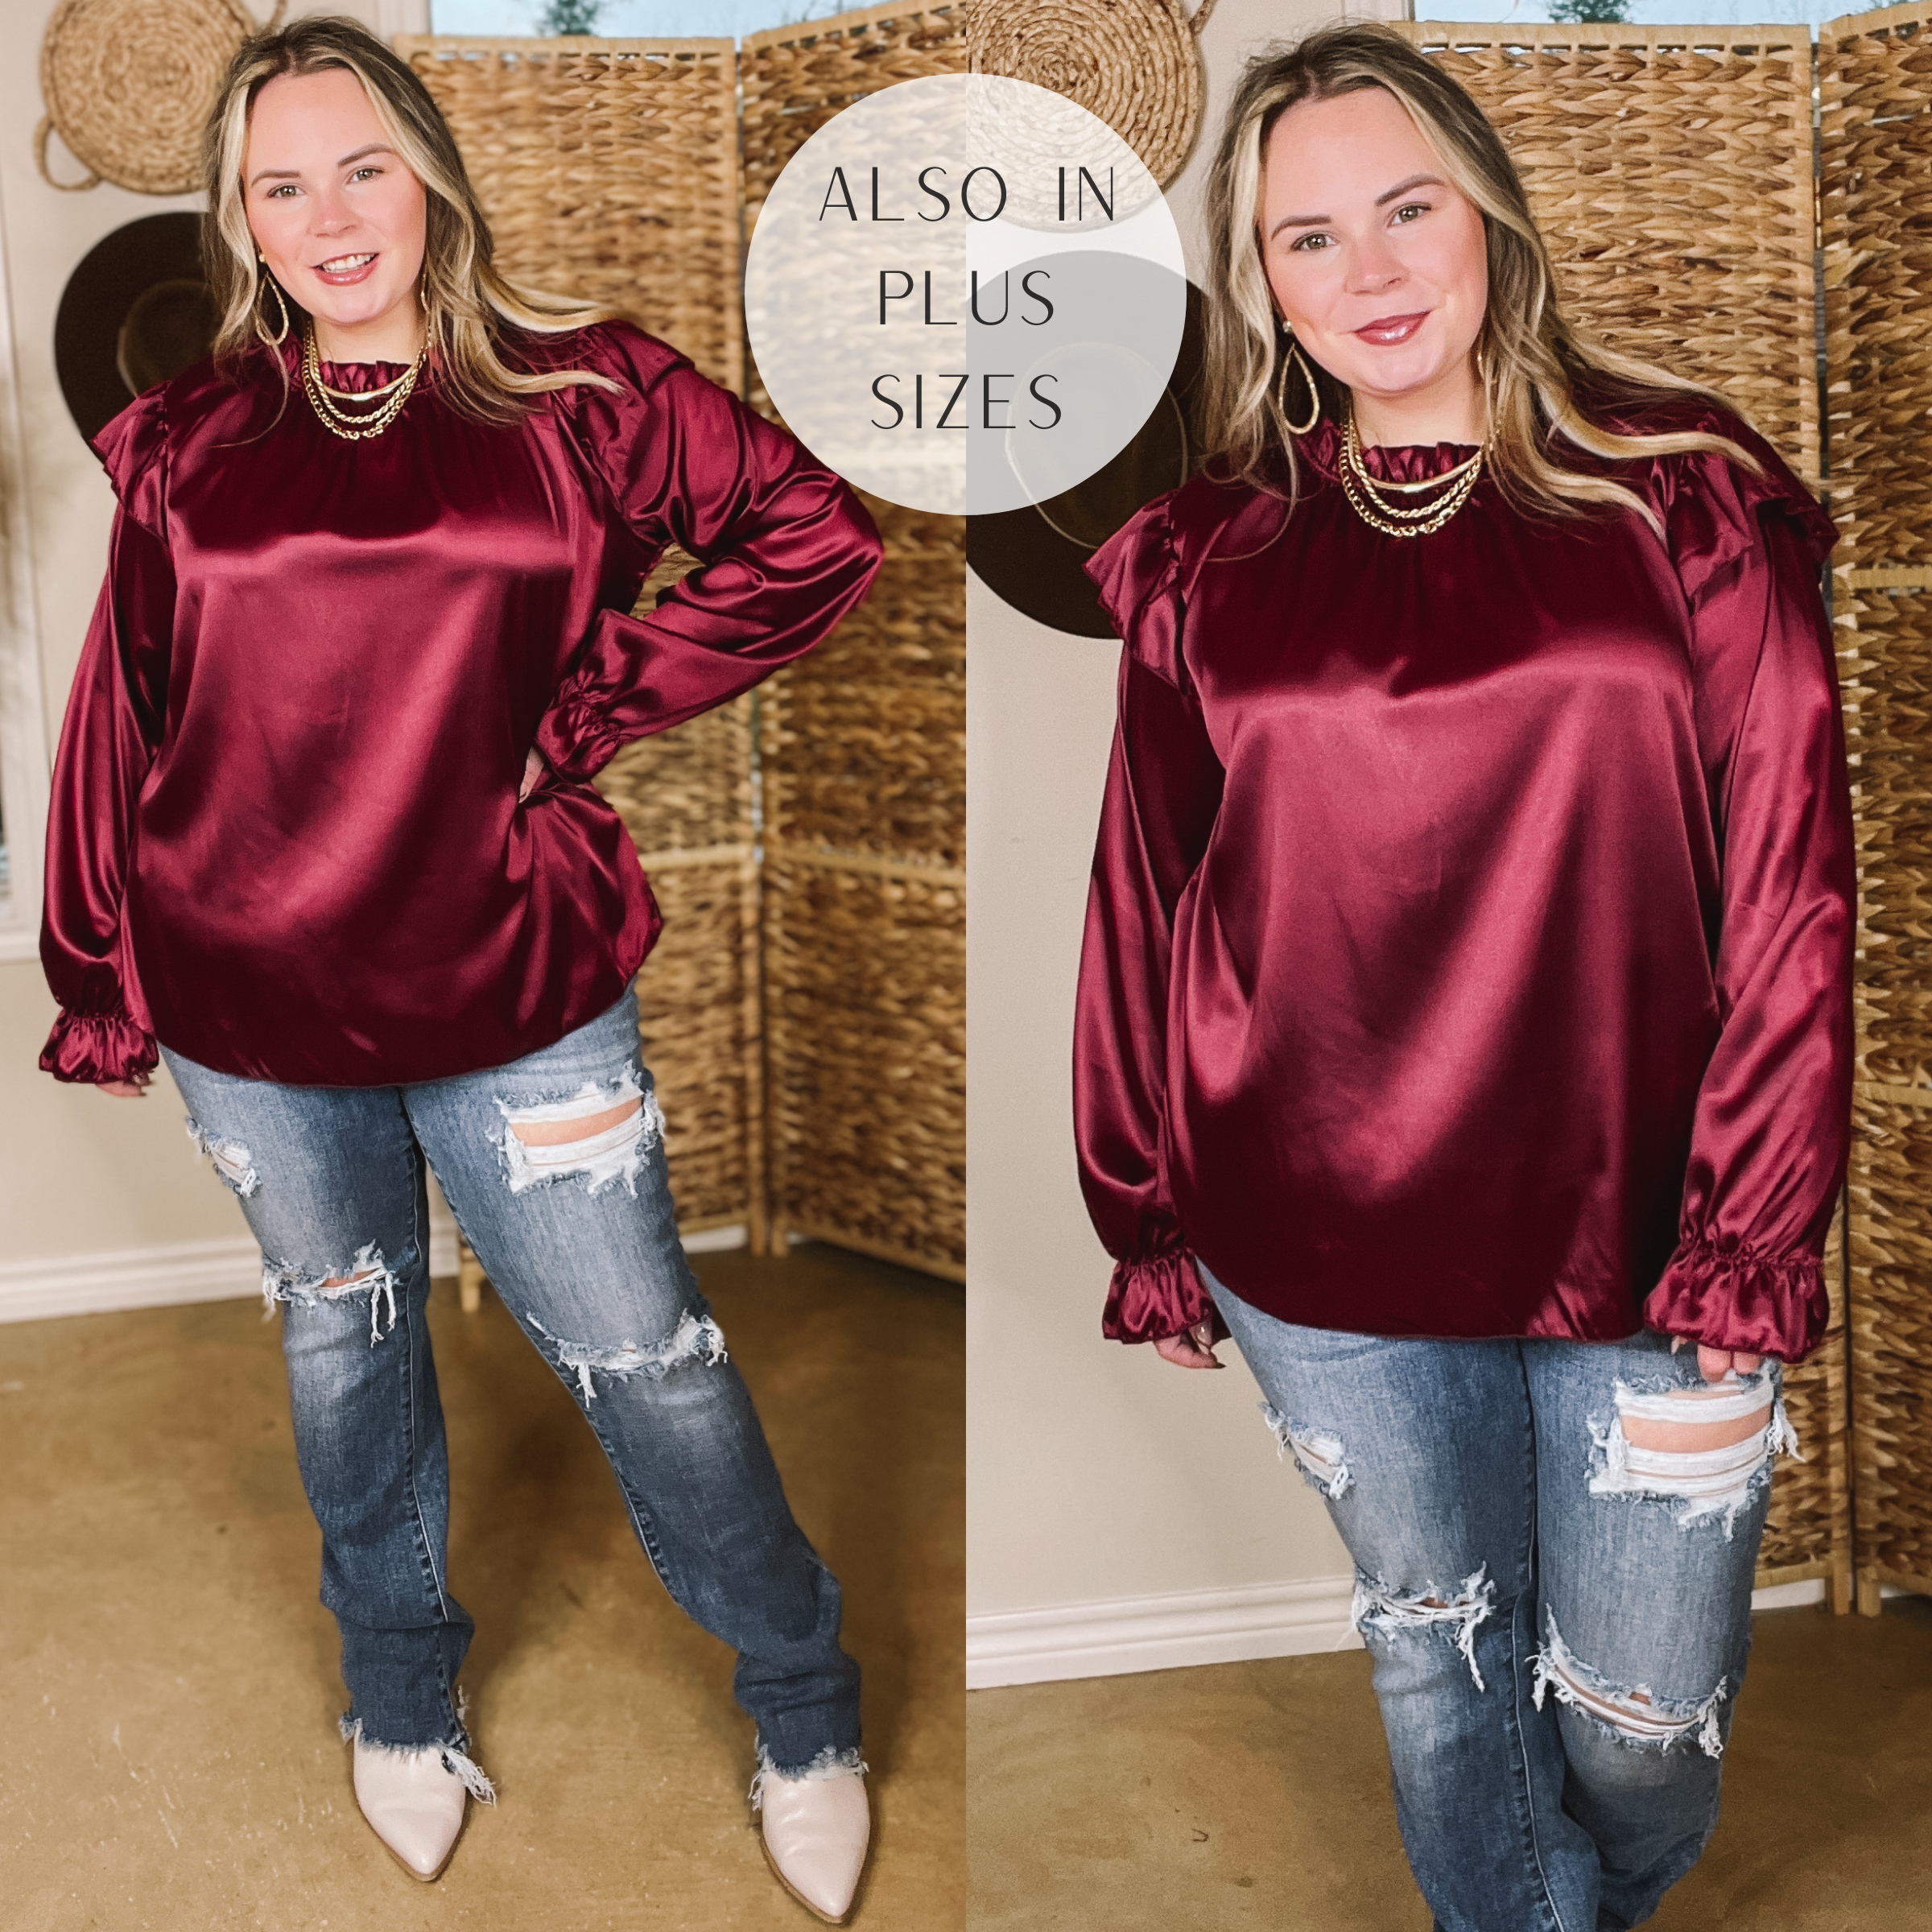 Model is wearing a maroon satin shirt with ruffles on the sleeves. Model is wearing white boties, distressed jeans, and has it paired with gold jewelry. 